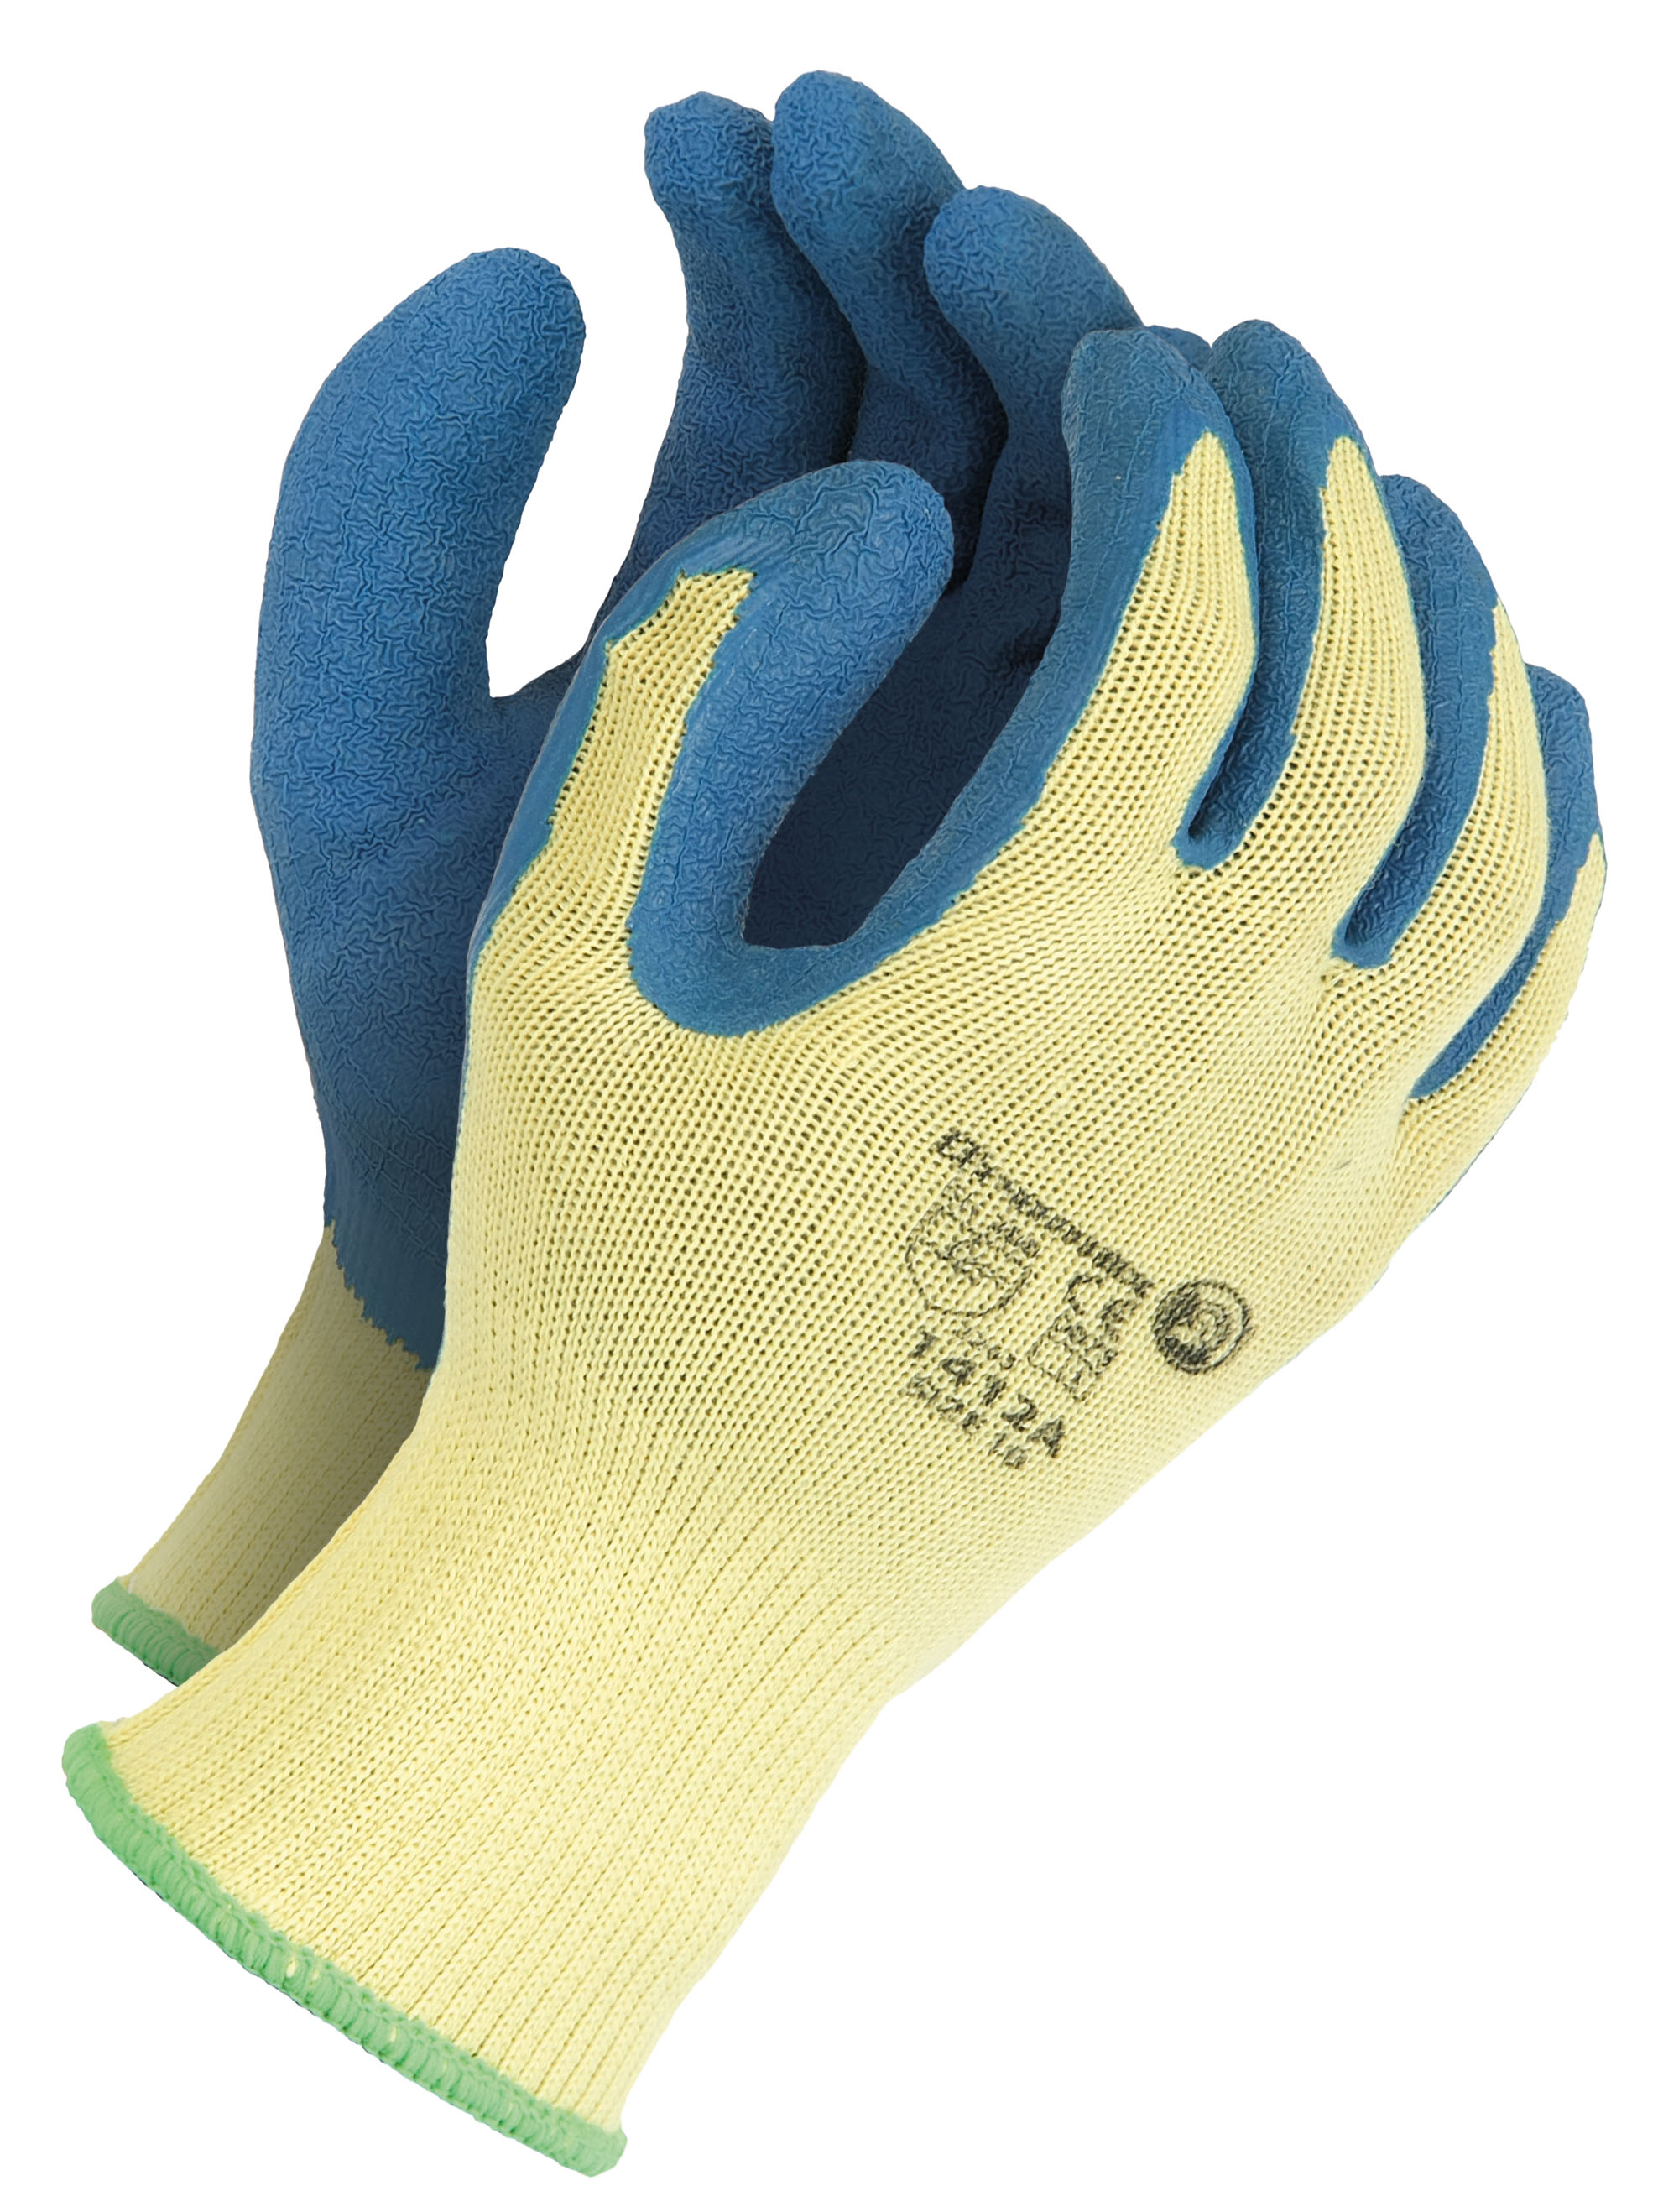 Safety Wear :: Hand Protection :: Rubber/Latex :: Gripper Gloves